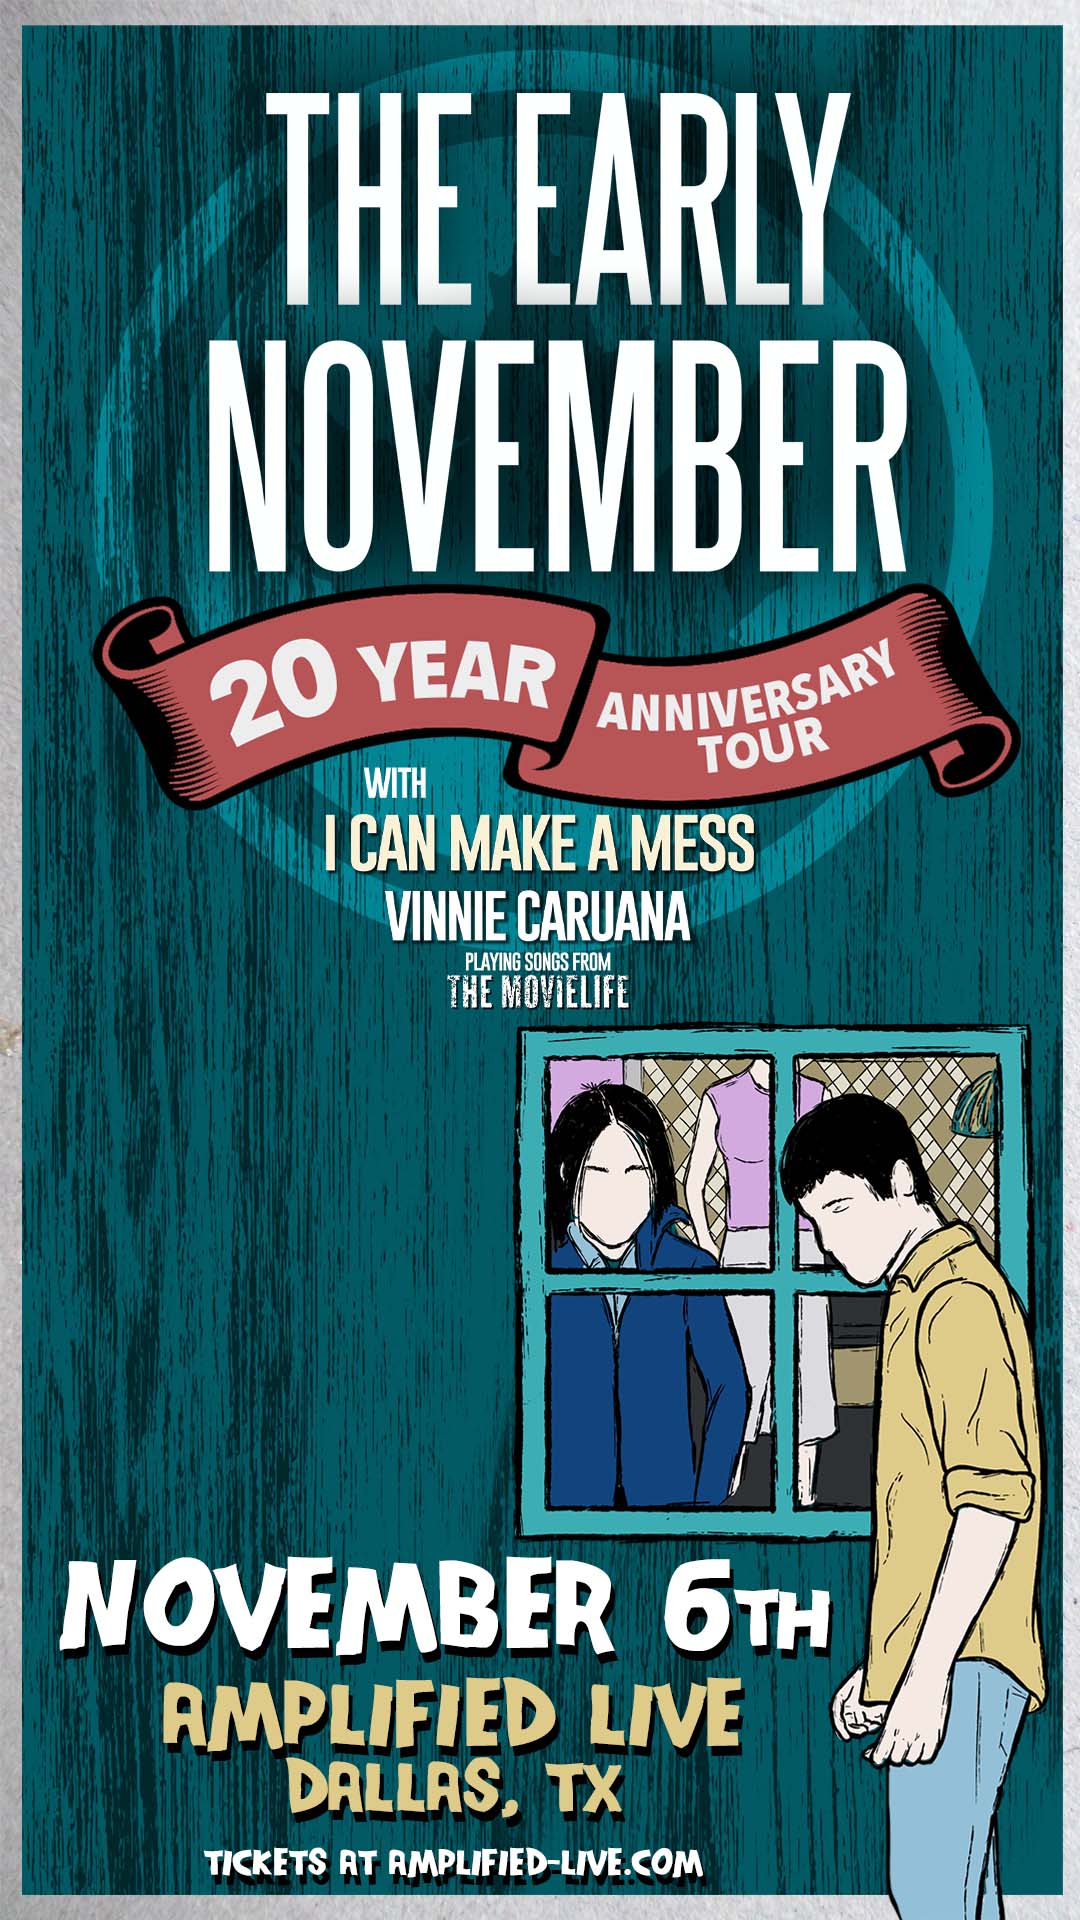 The Early November 20 Year Anniversary Tour